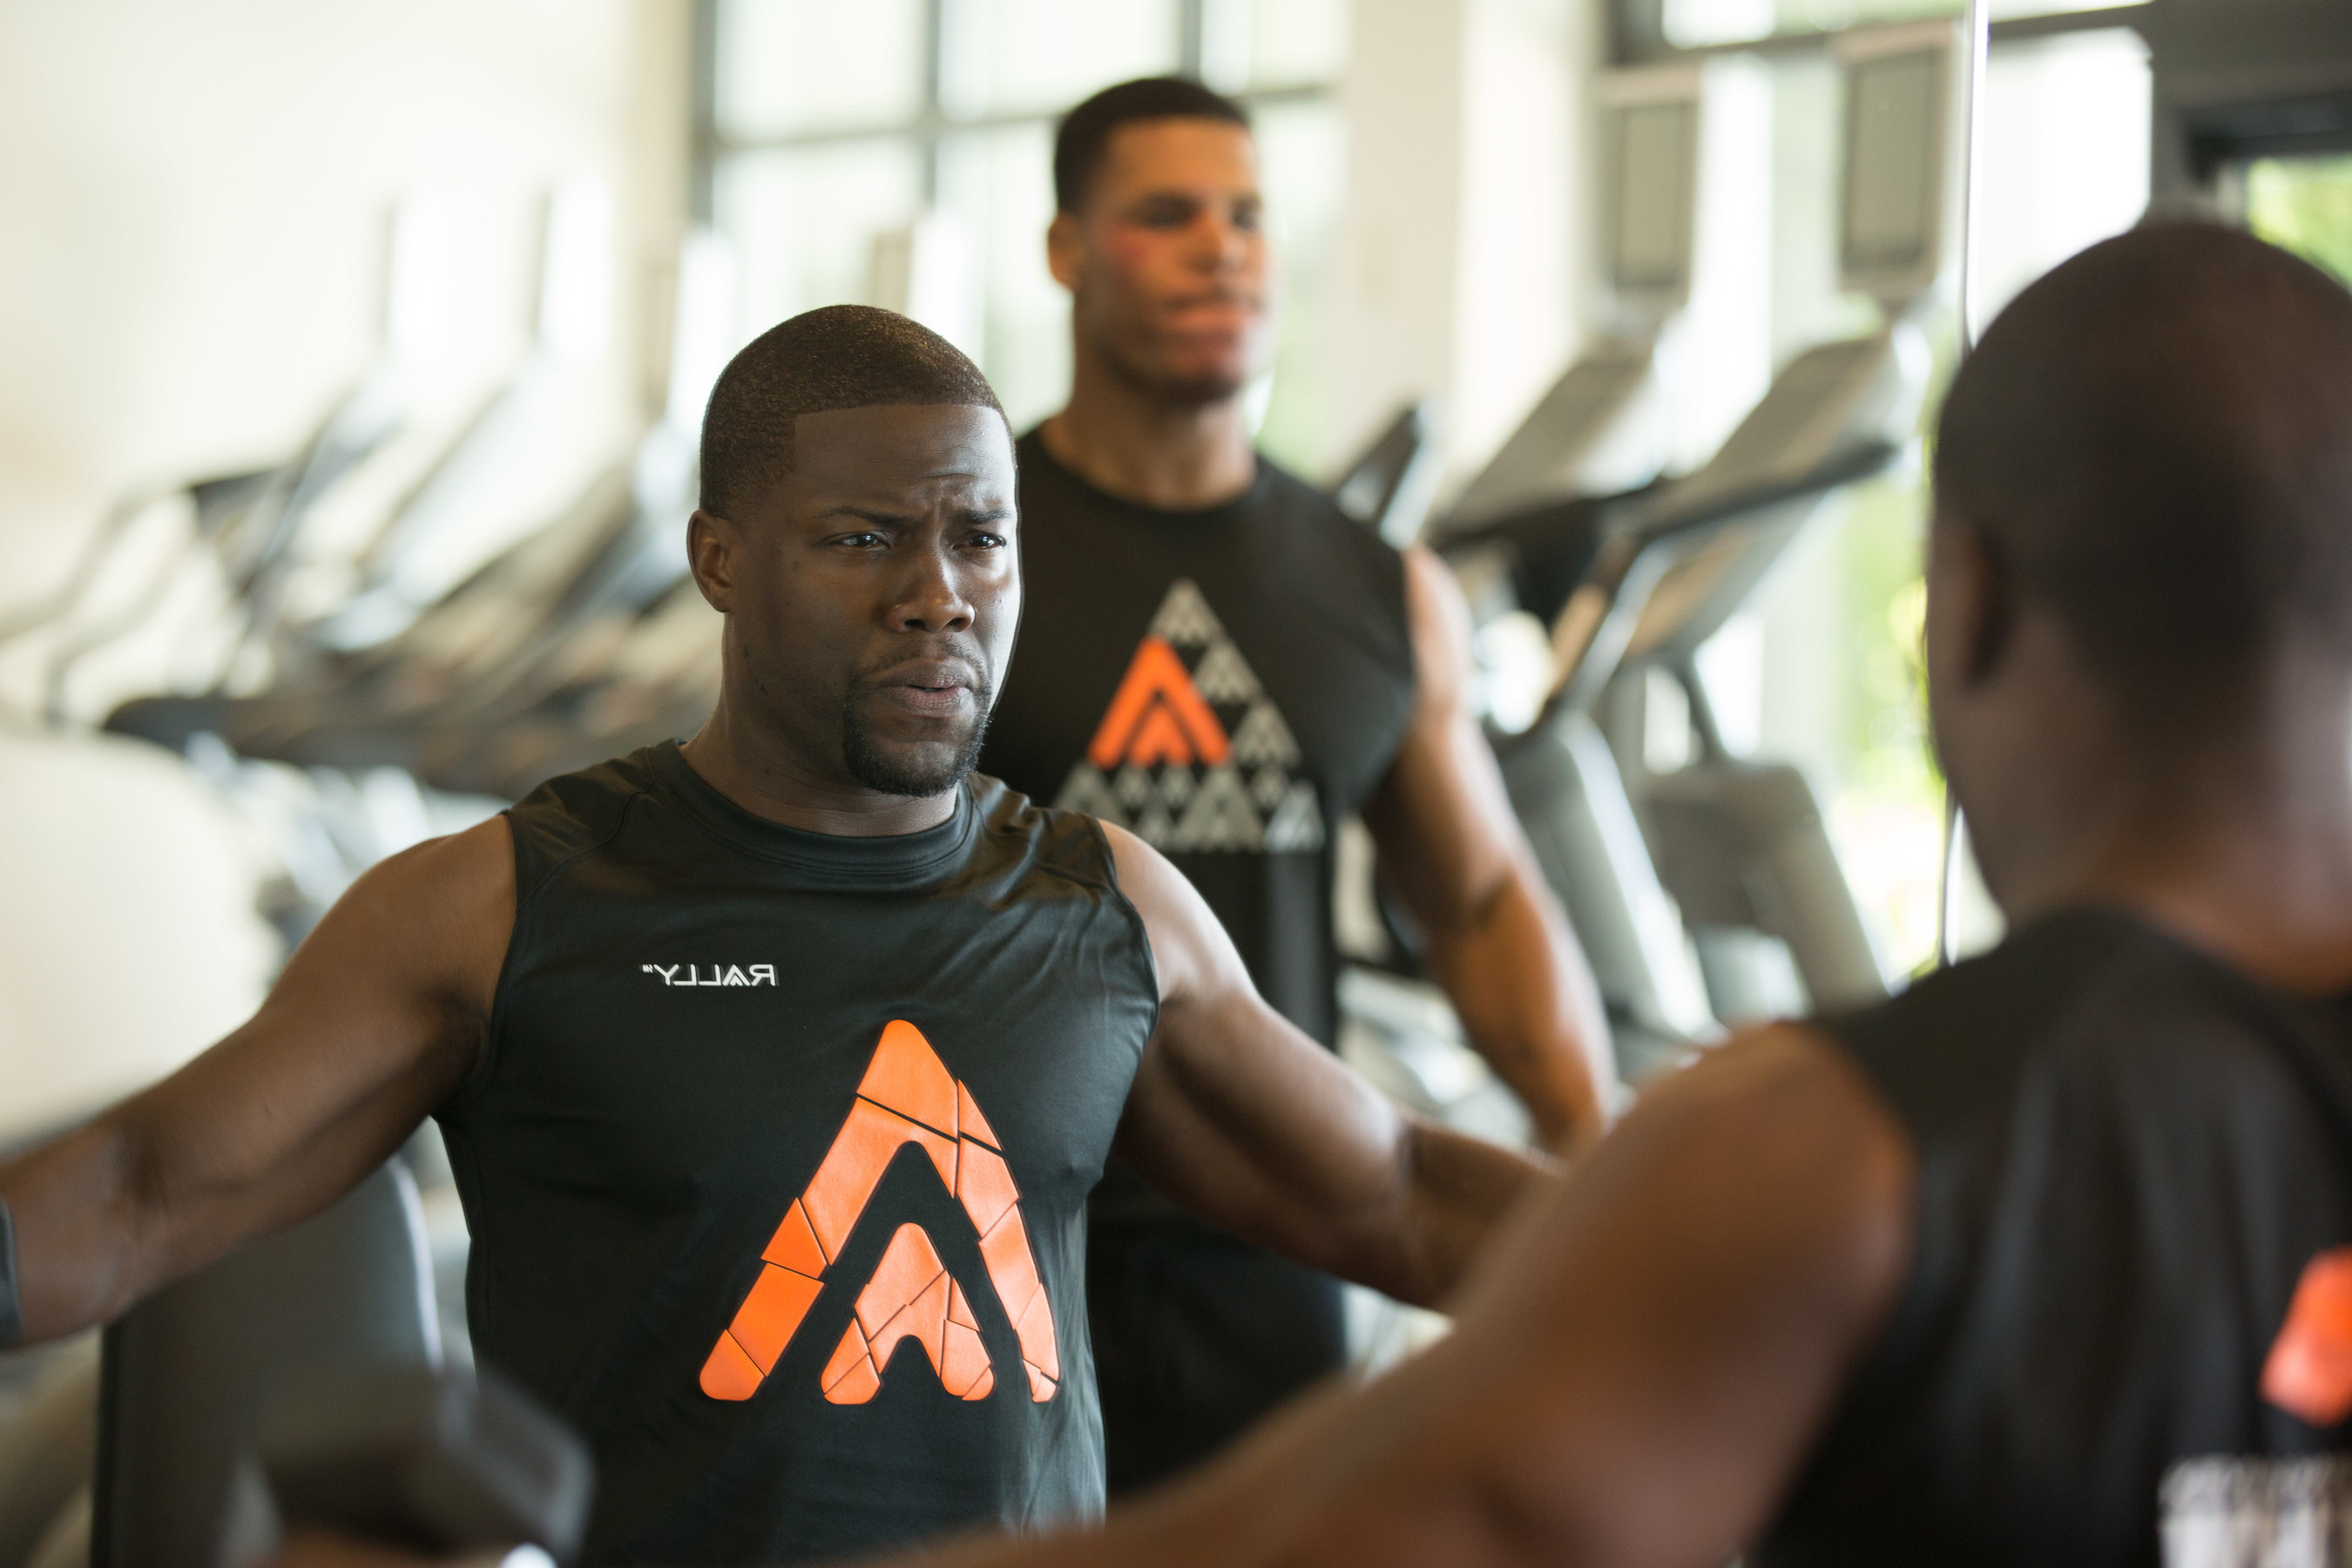 Rally Health And Kevin Hart Team Up To Raise Awareness Of Healthy Habits Through Laughter.